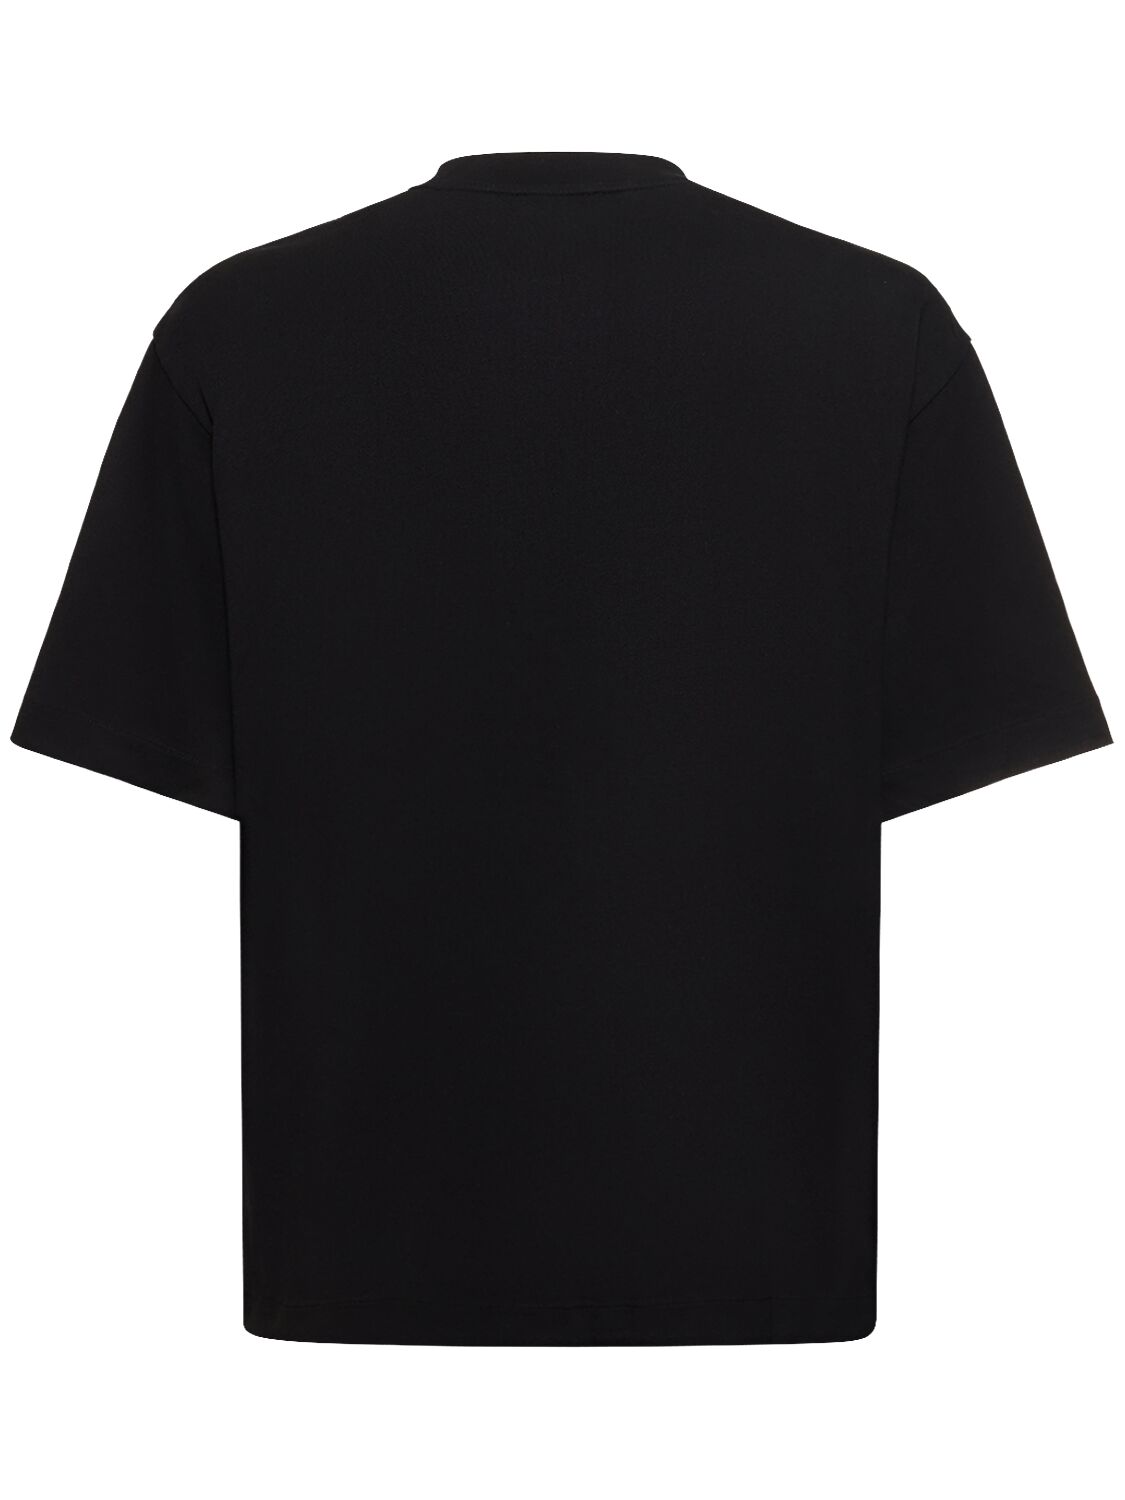 Shop Off-white Ow 23 Skate Cotton T-shirt In Black,gold